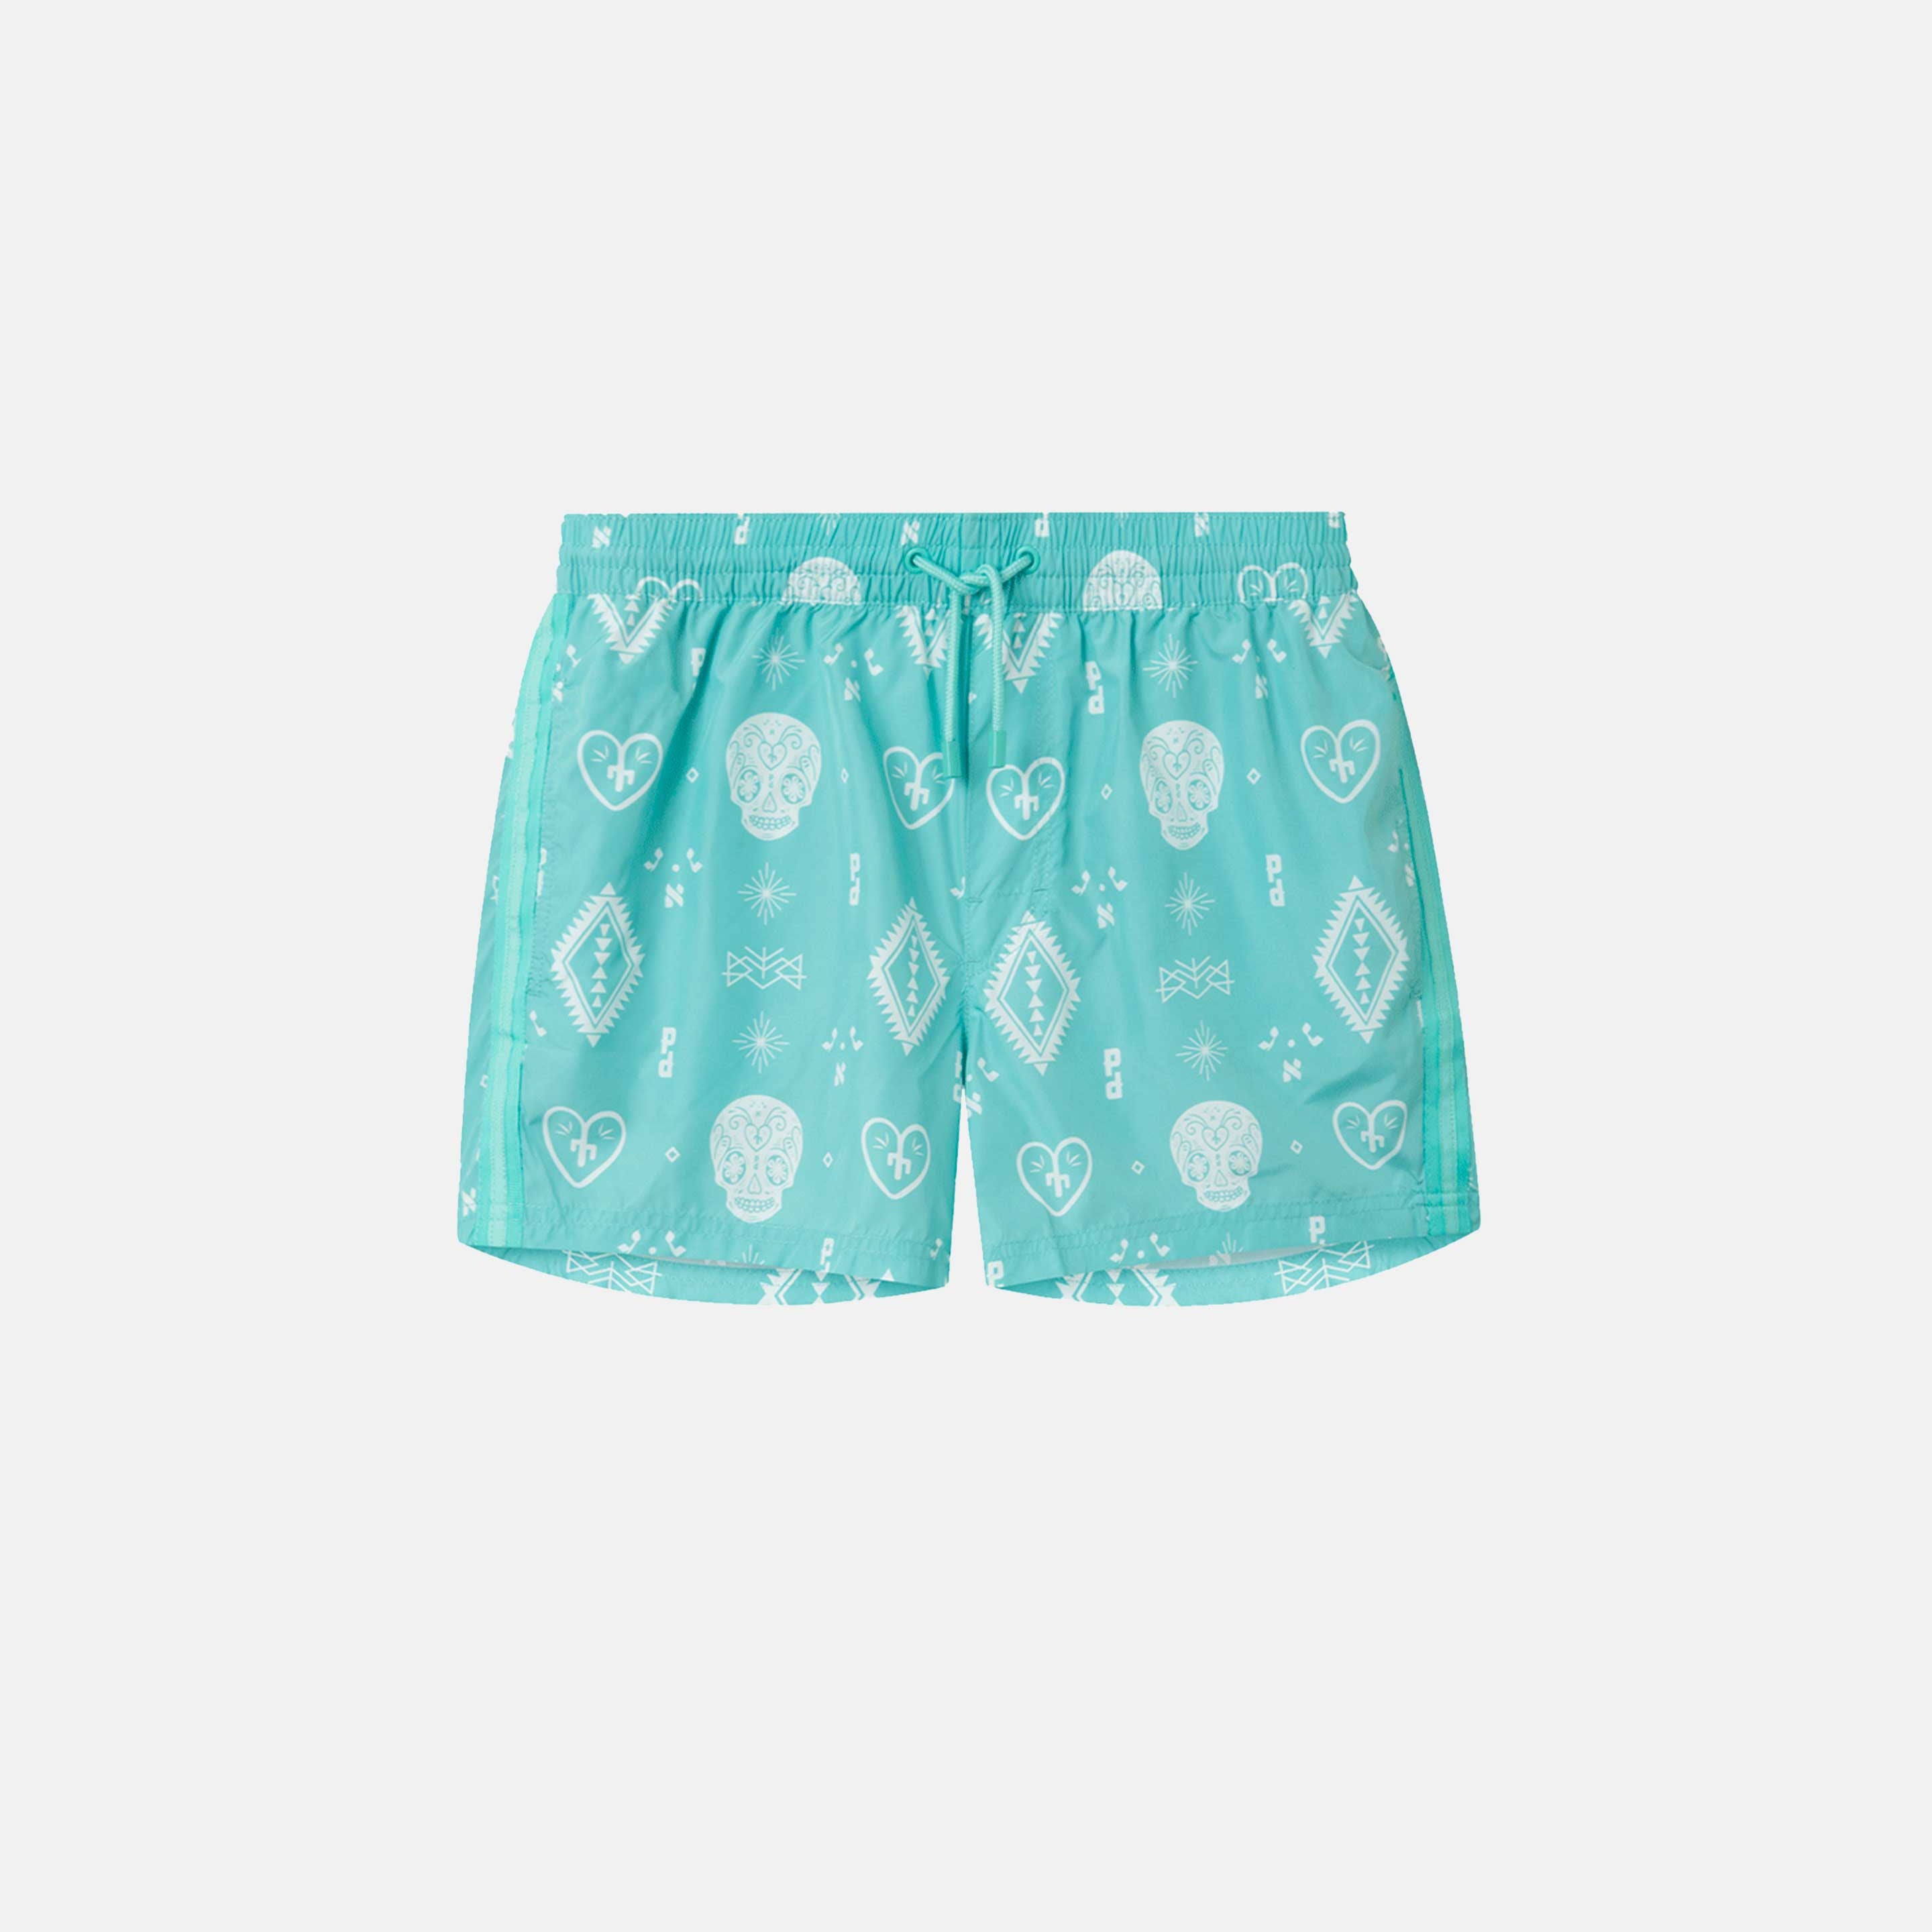 Turqoise blue swim trunks with white print. Mid length with drawstring and two side pockets.